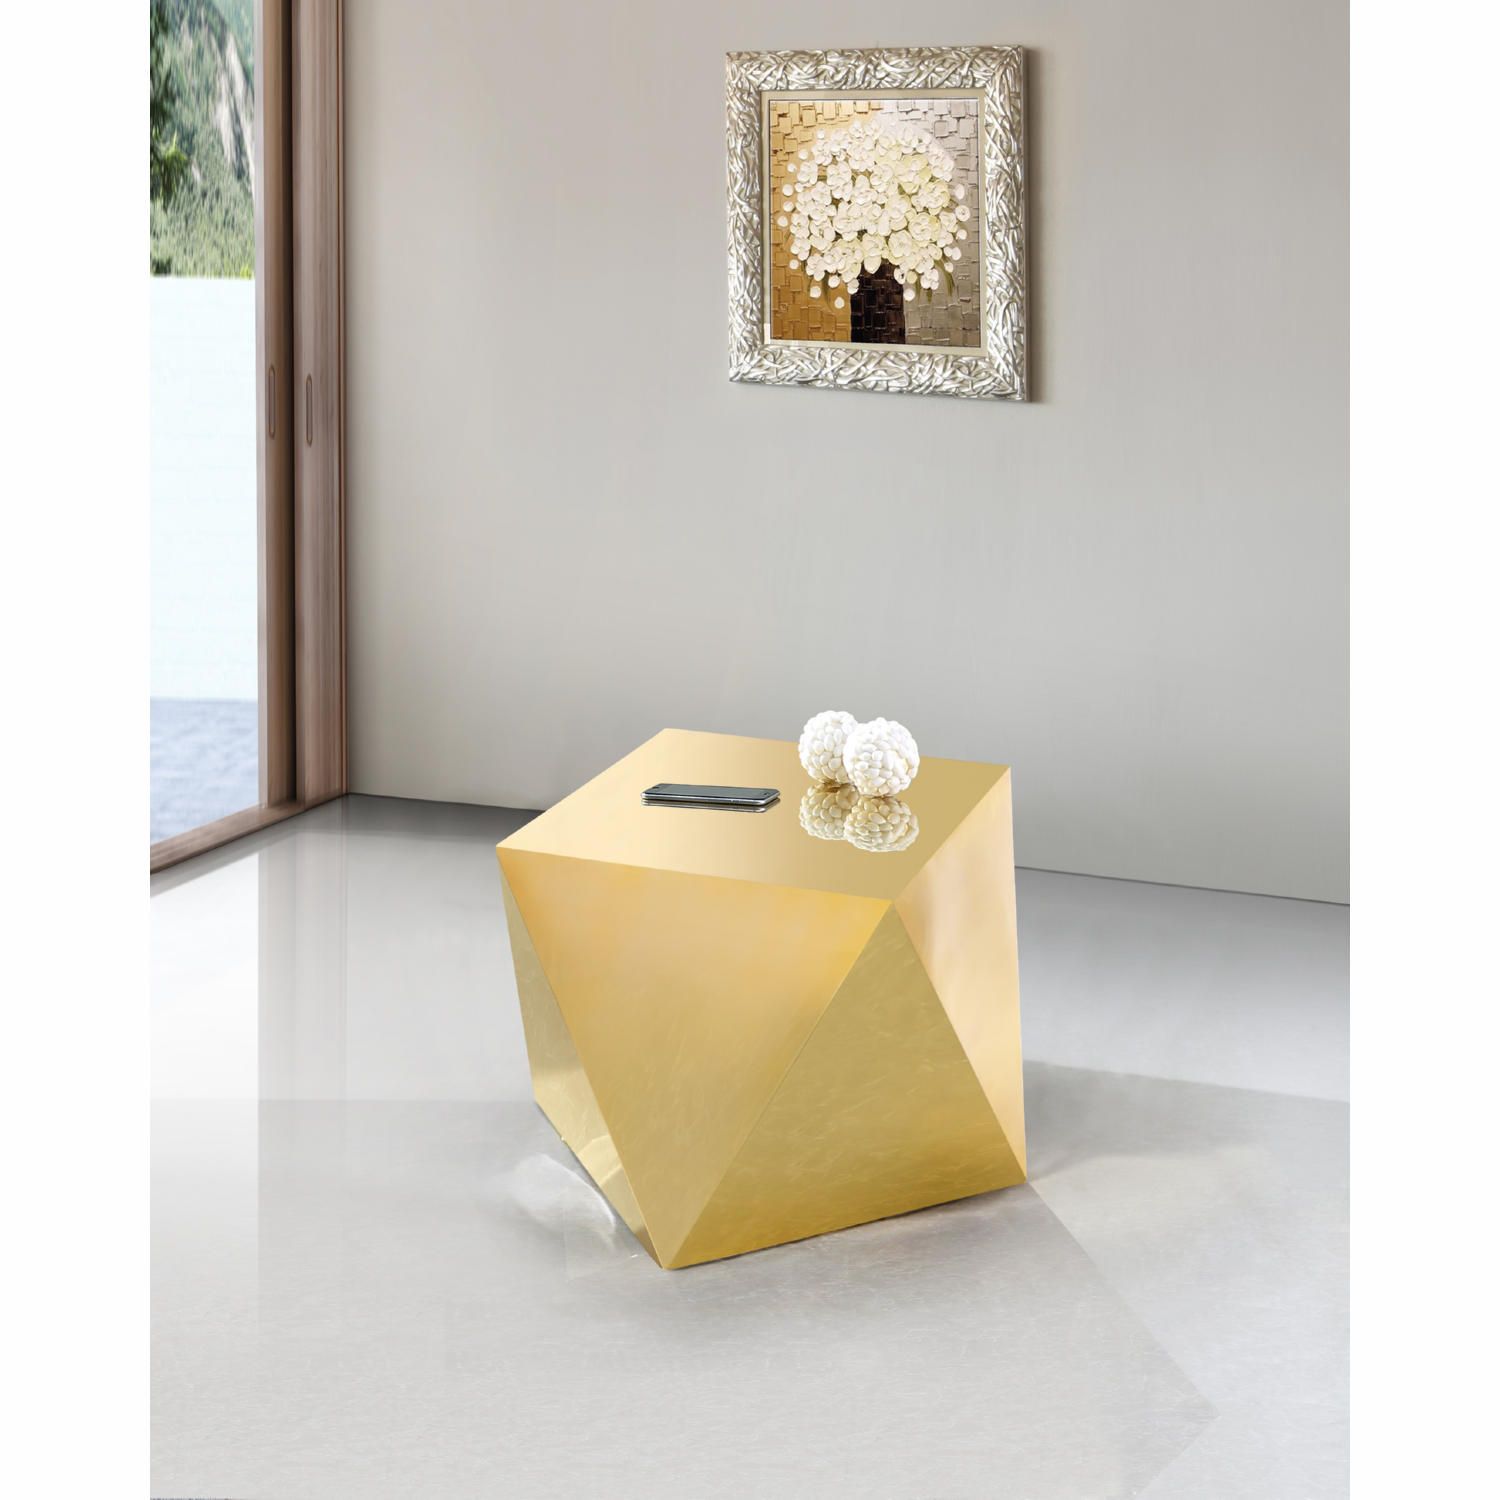 Meridian 222gold E Gemma Diamond Shape End Table In Gold Stainless Steel In Diamond Shape Coffee Tables (View 7 of 15)